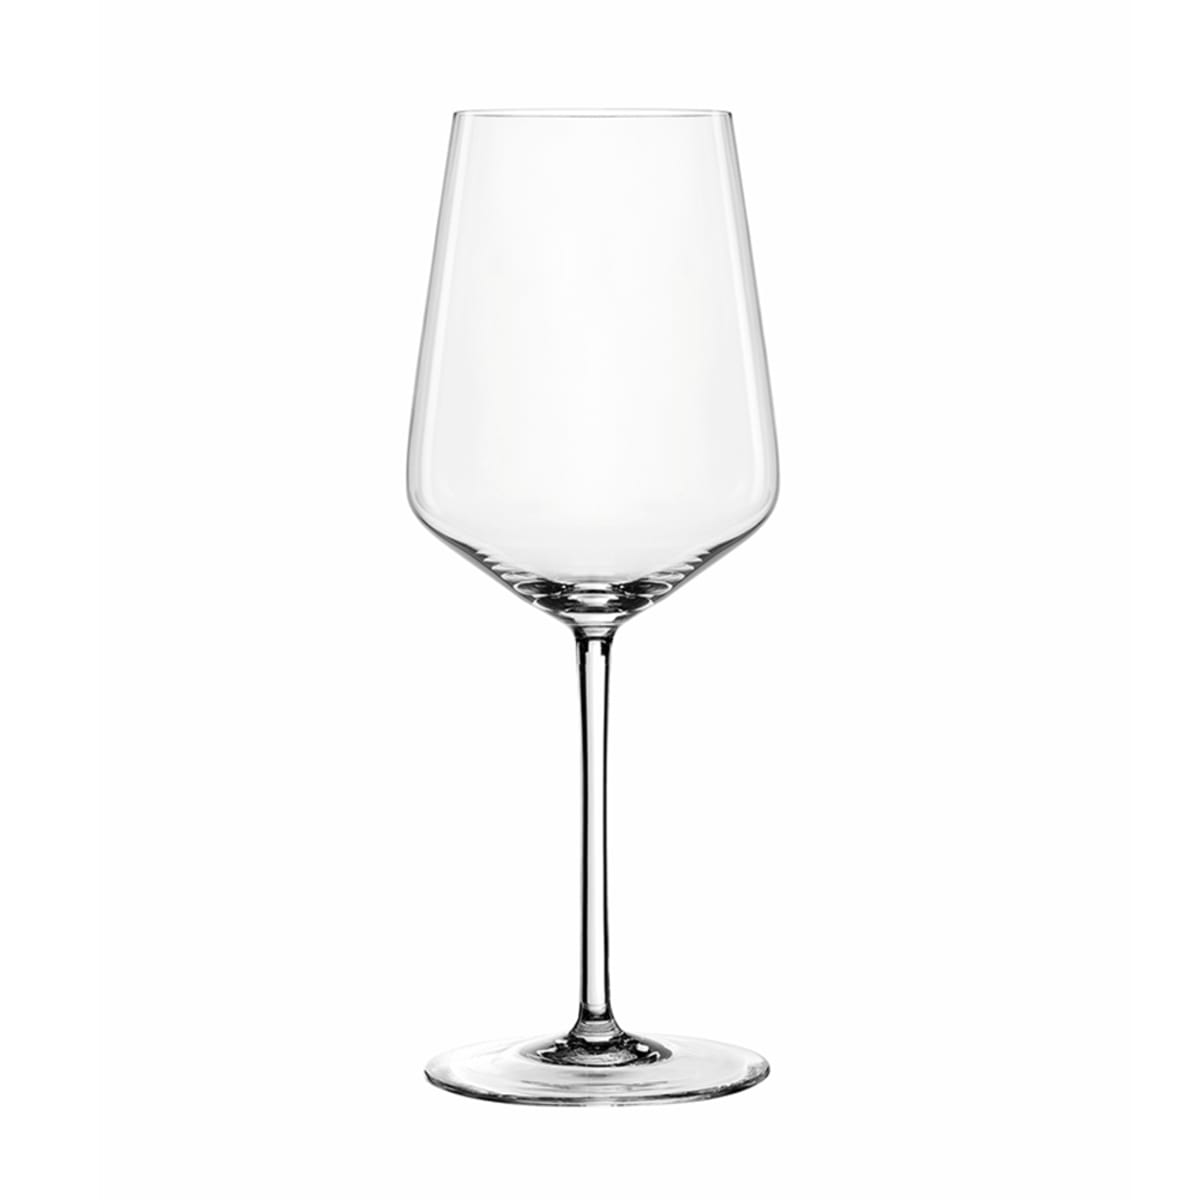 Modern white wine glass from Flame collection